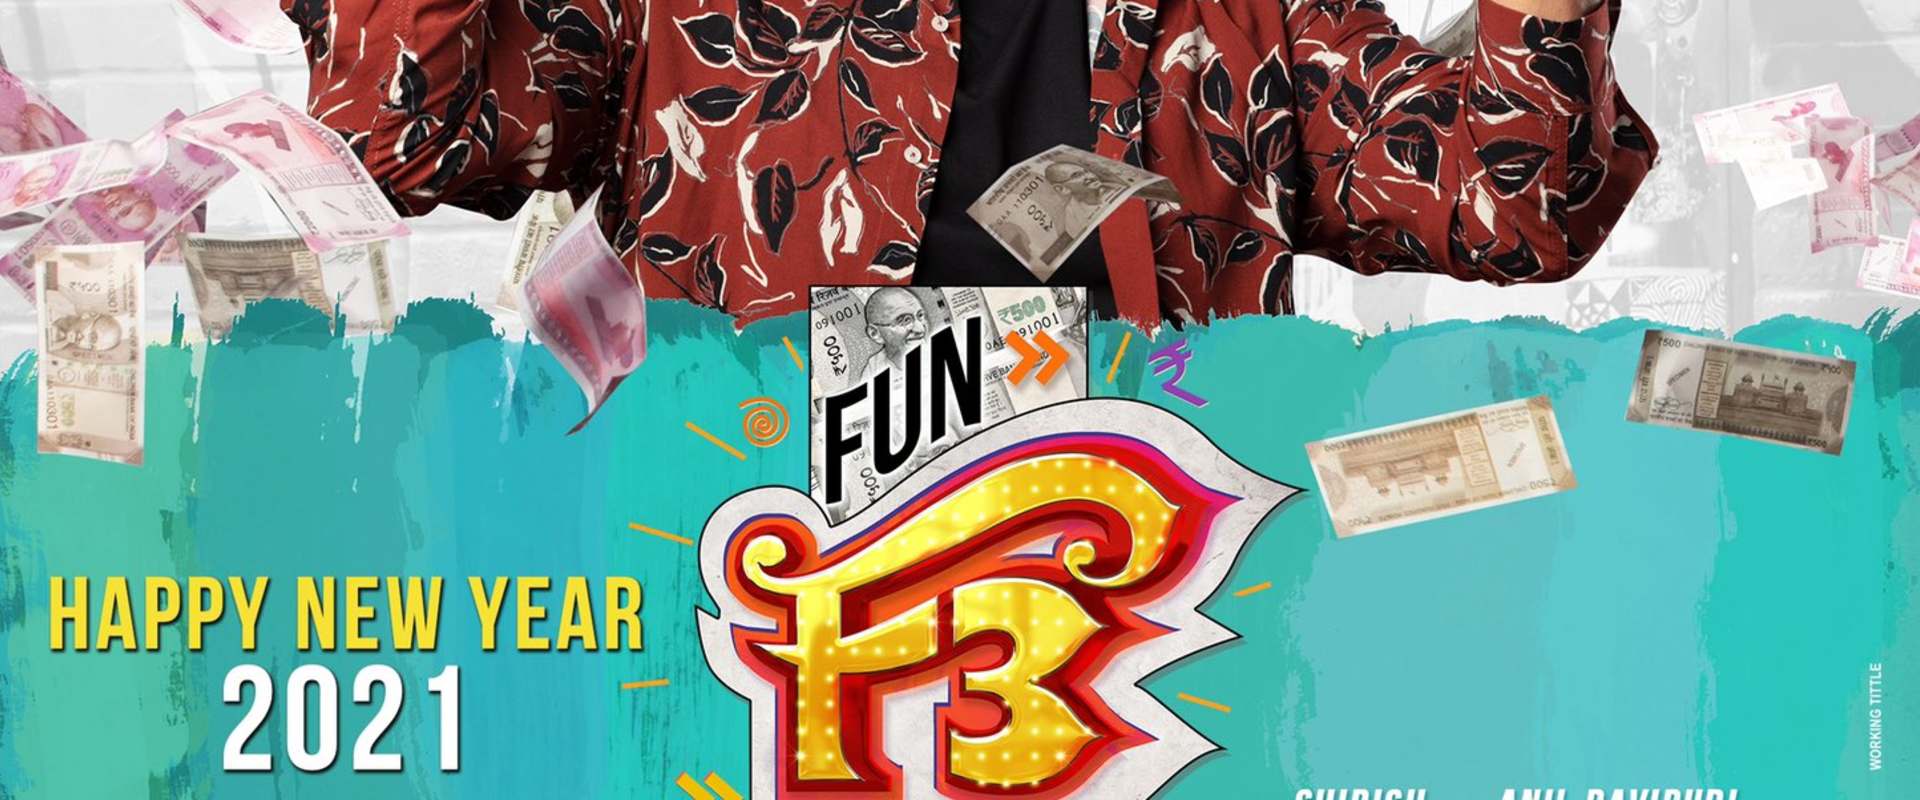 F3: Fun and Frustration background 2